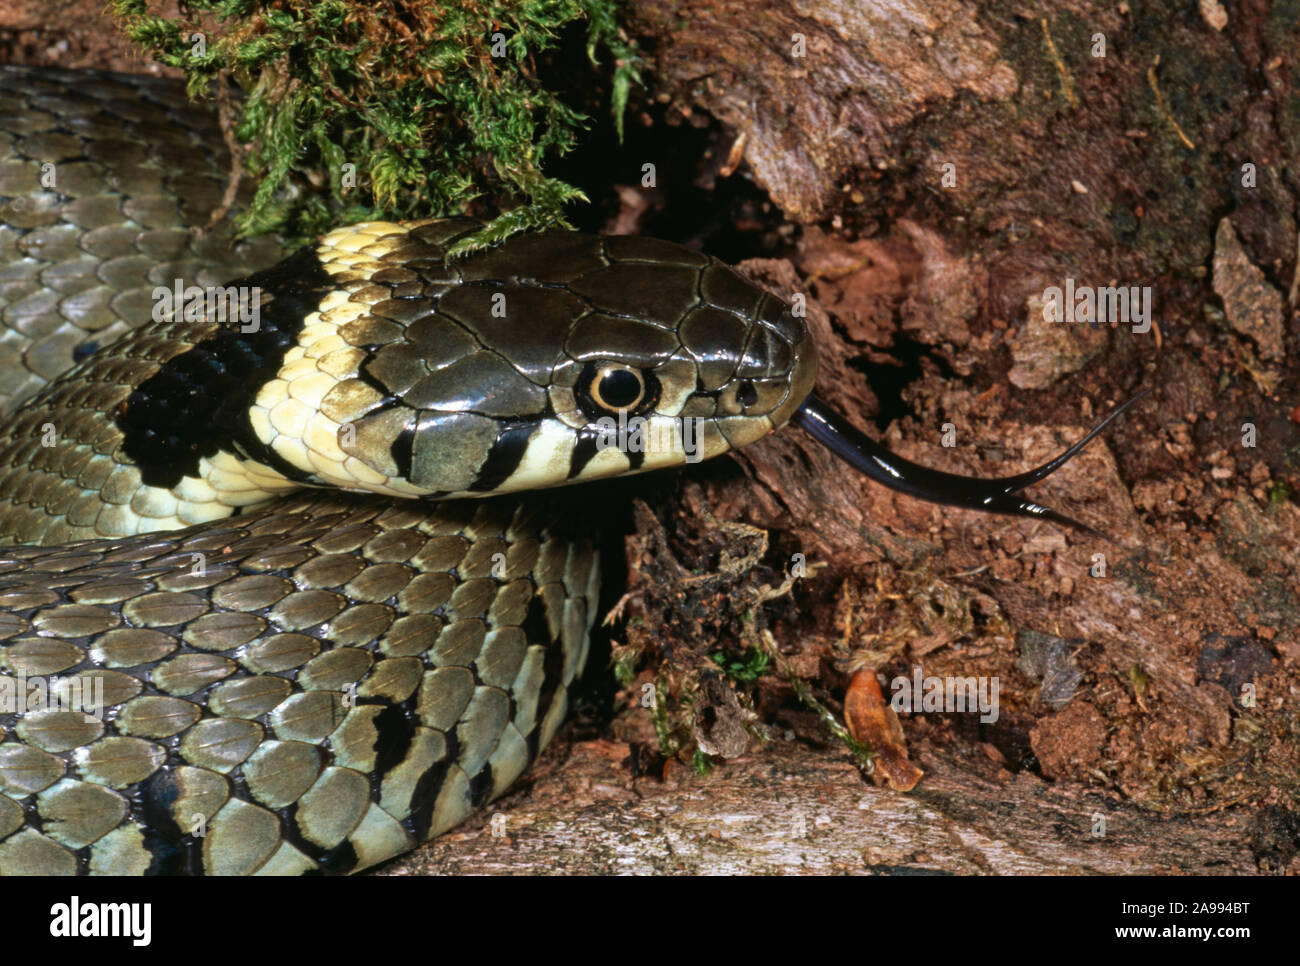 GRASS SNAKE (Natrix natrix helvetica)  Vew of forked tongue, and the yellow neck collar, round eye pupil, help identifying the species. Stock Photo